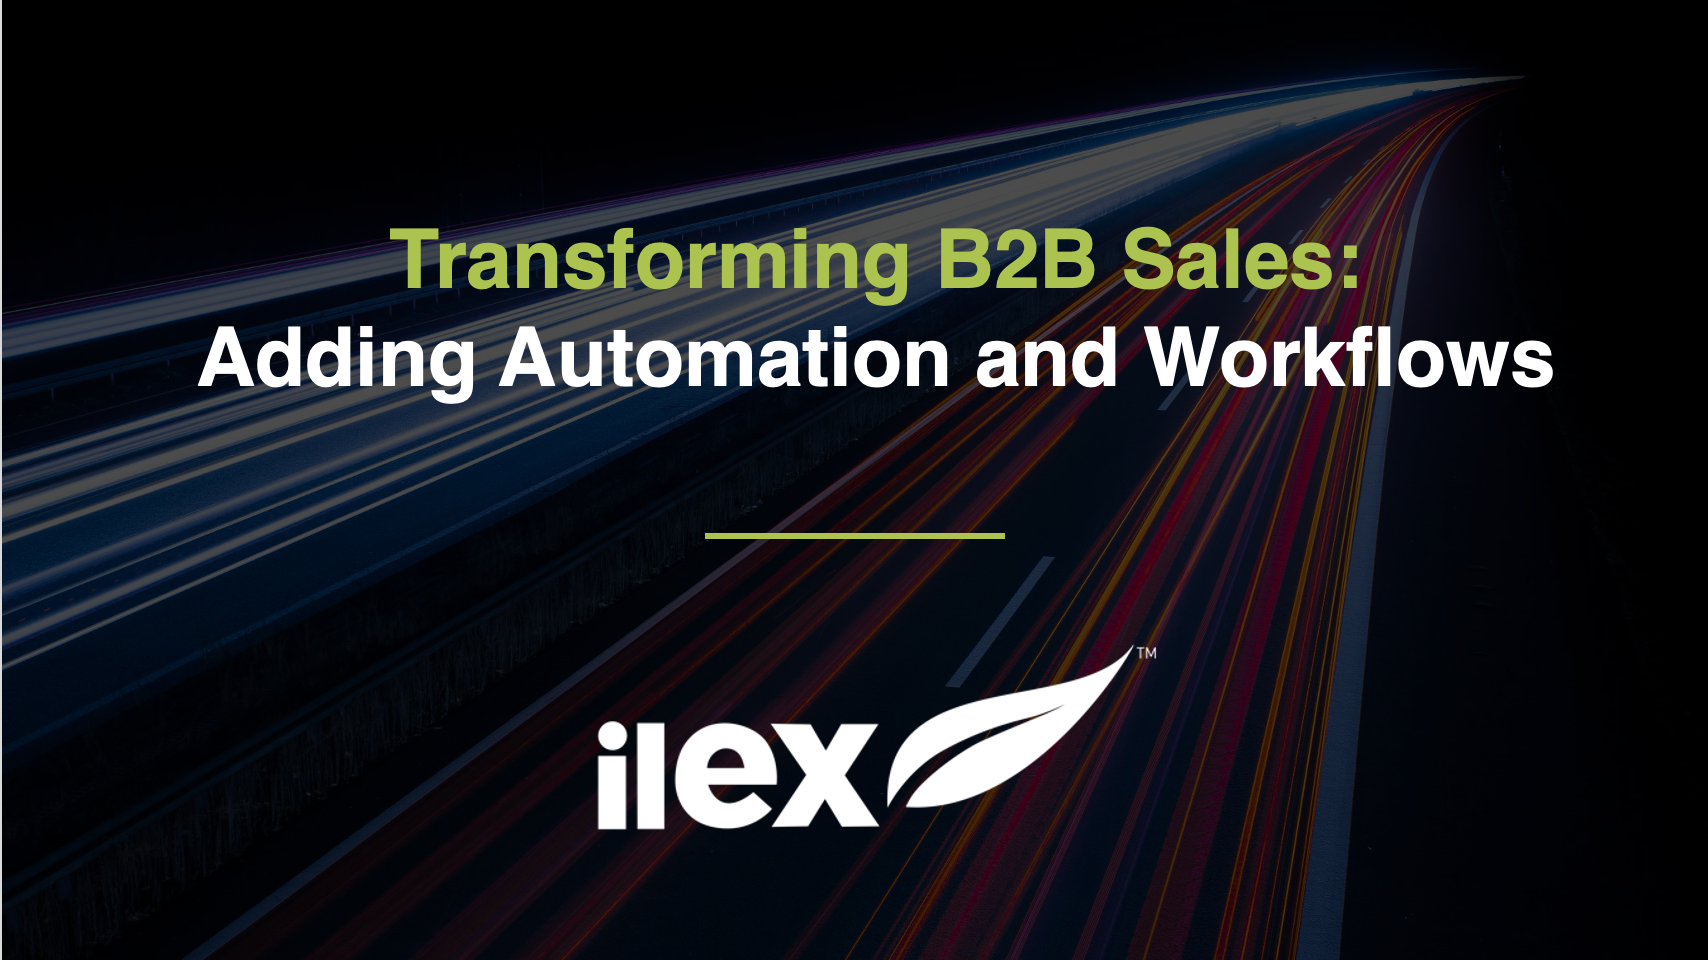 Transforming B2B Sales: Adding Automation and Workflows